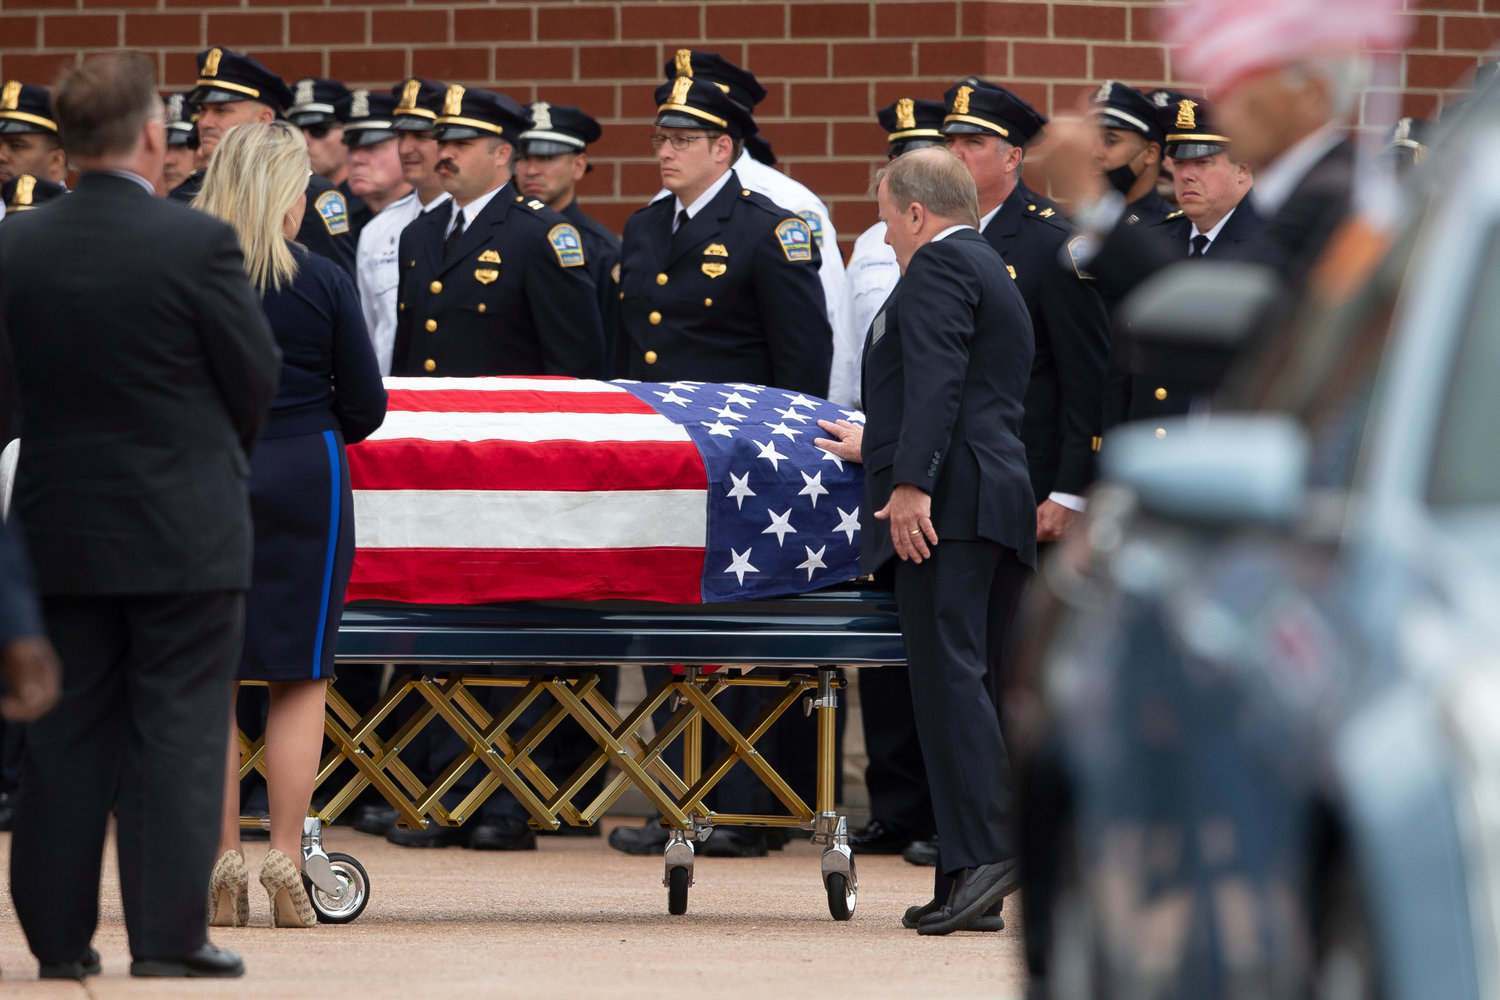 A person touches the casket of Aaron Salter Jr. during a funeral service at The Chapel at Crosspoint on Wednesday, May 25, 2022, in Getzville, N.Y. Salter Jr. was killed in the Buffalo supermarket shooting on May 14. (AP Photo/Joshua Bessex)